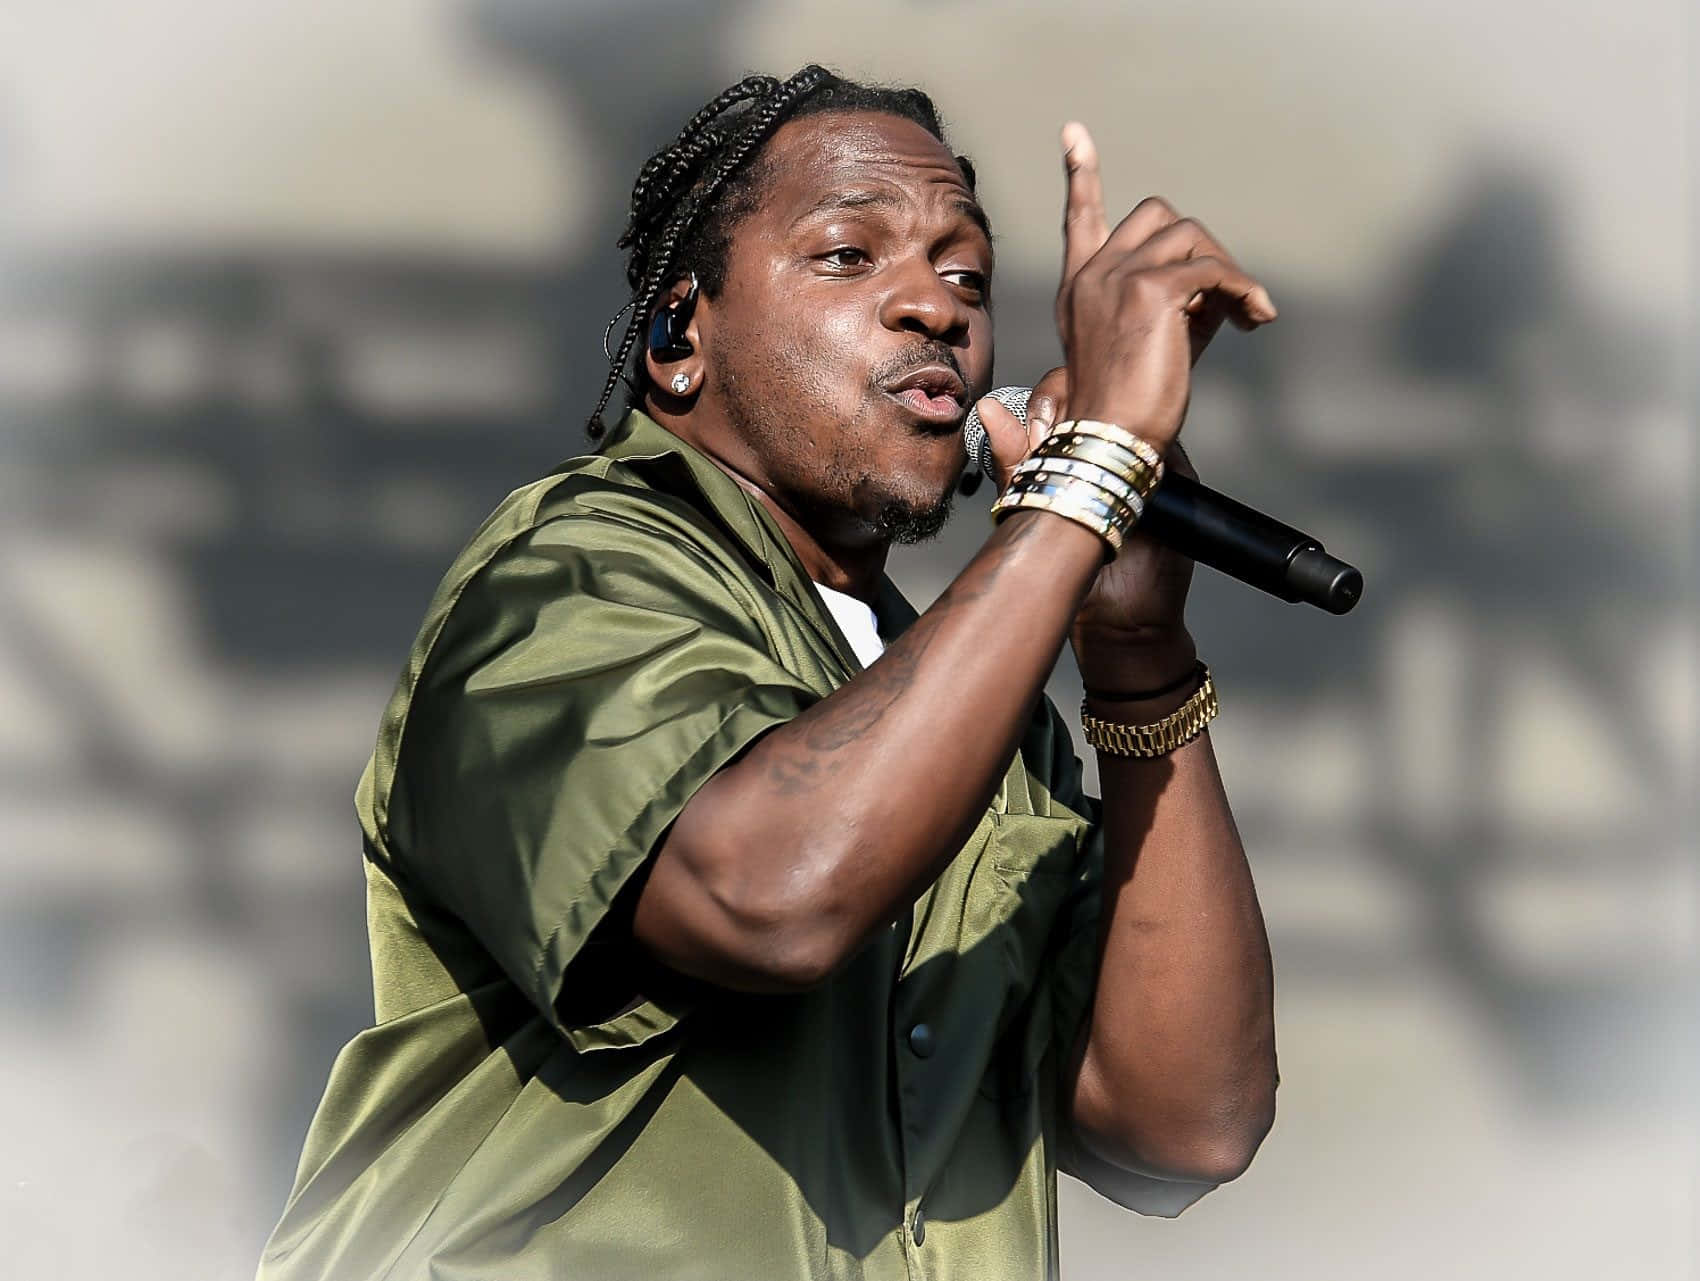 Pusha T Performing Liveon Stage Wallpaper